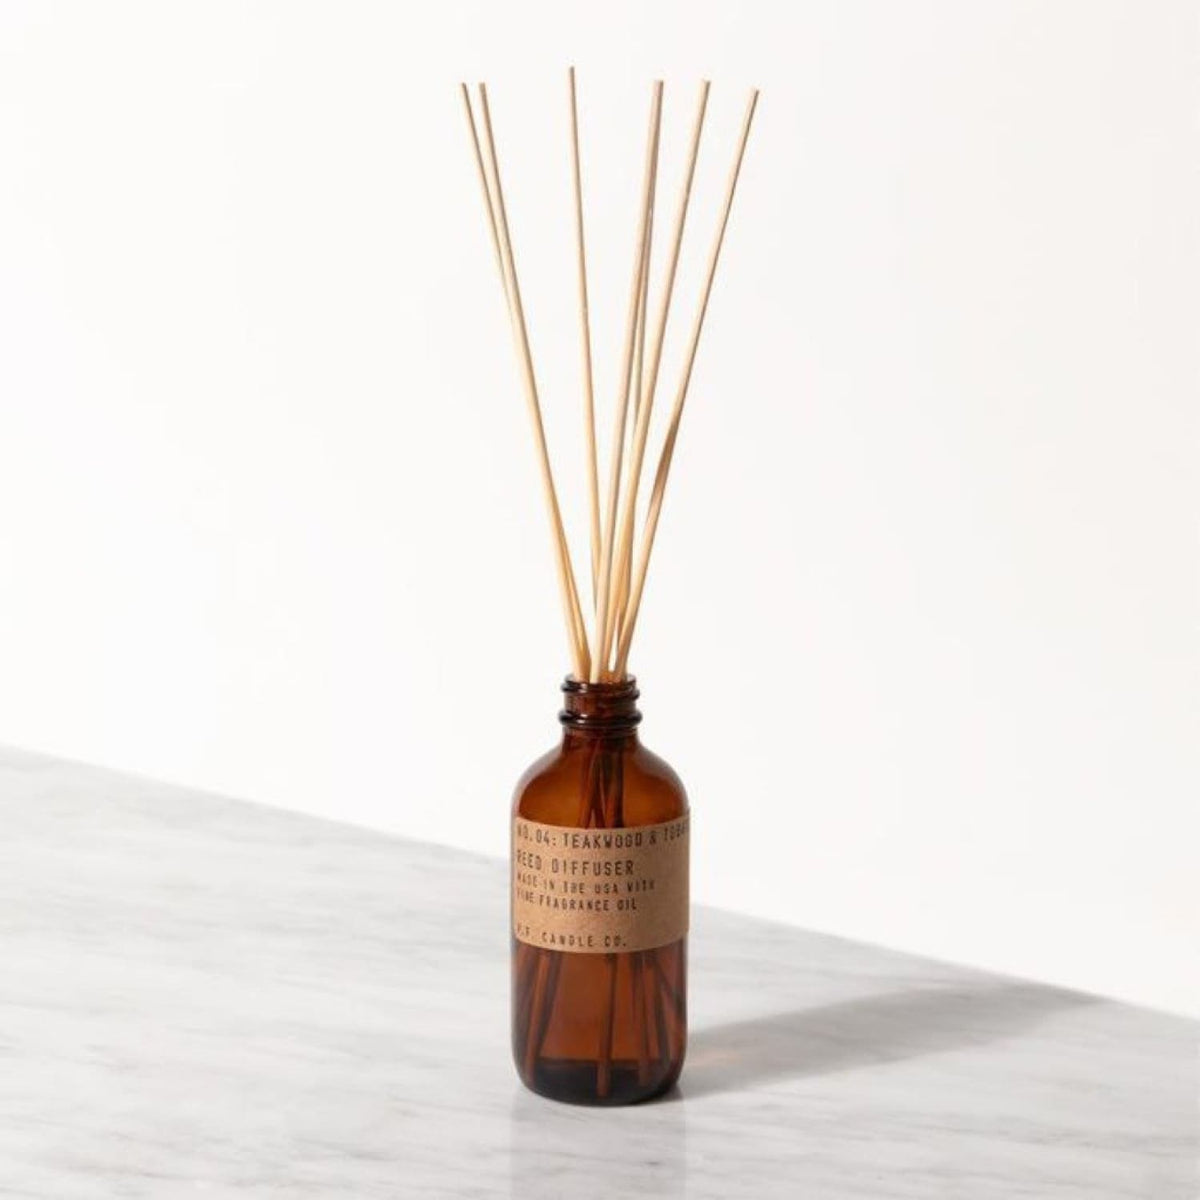 P.f. Candle Co. Reed Diffuser - Teakwood & Tobacco Candles, 